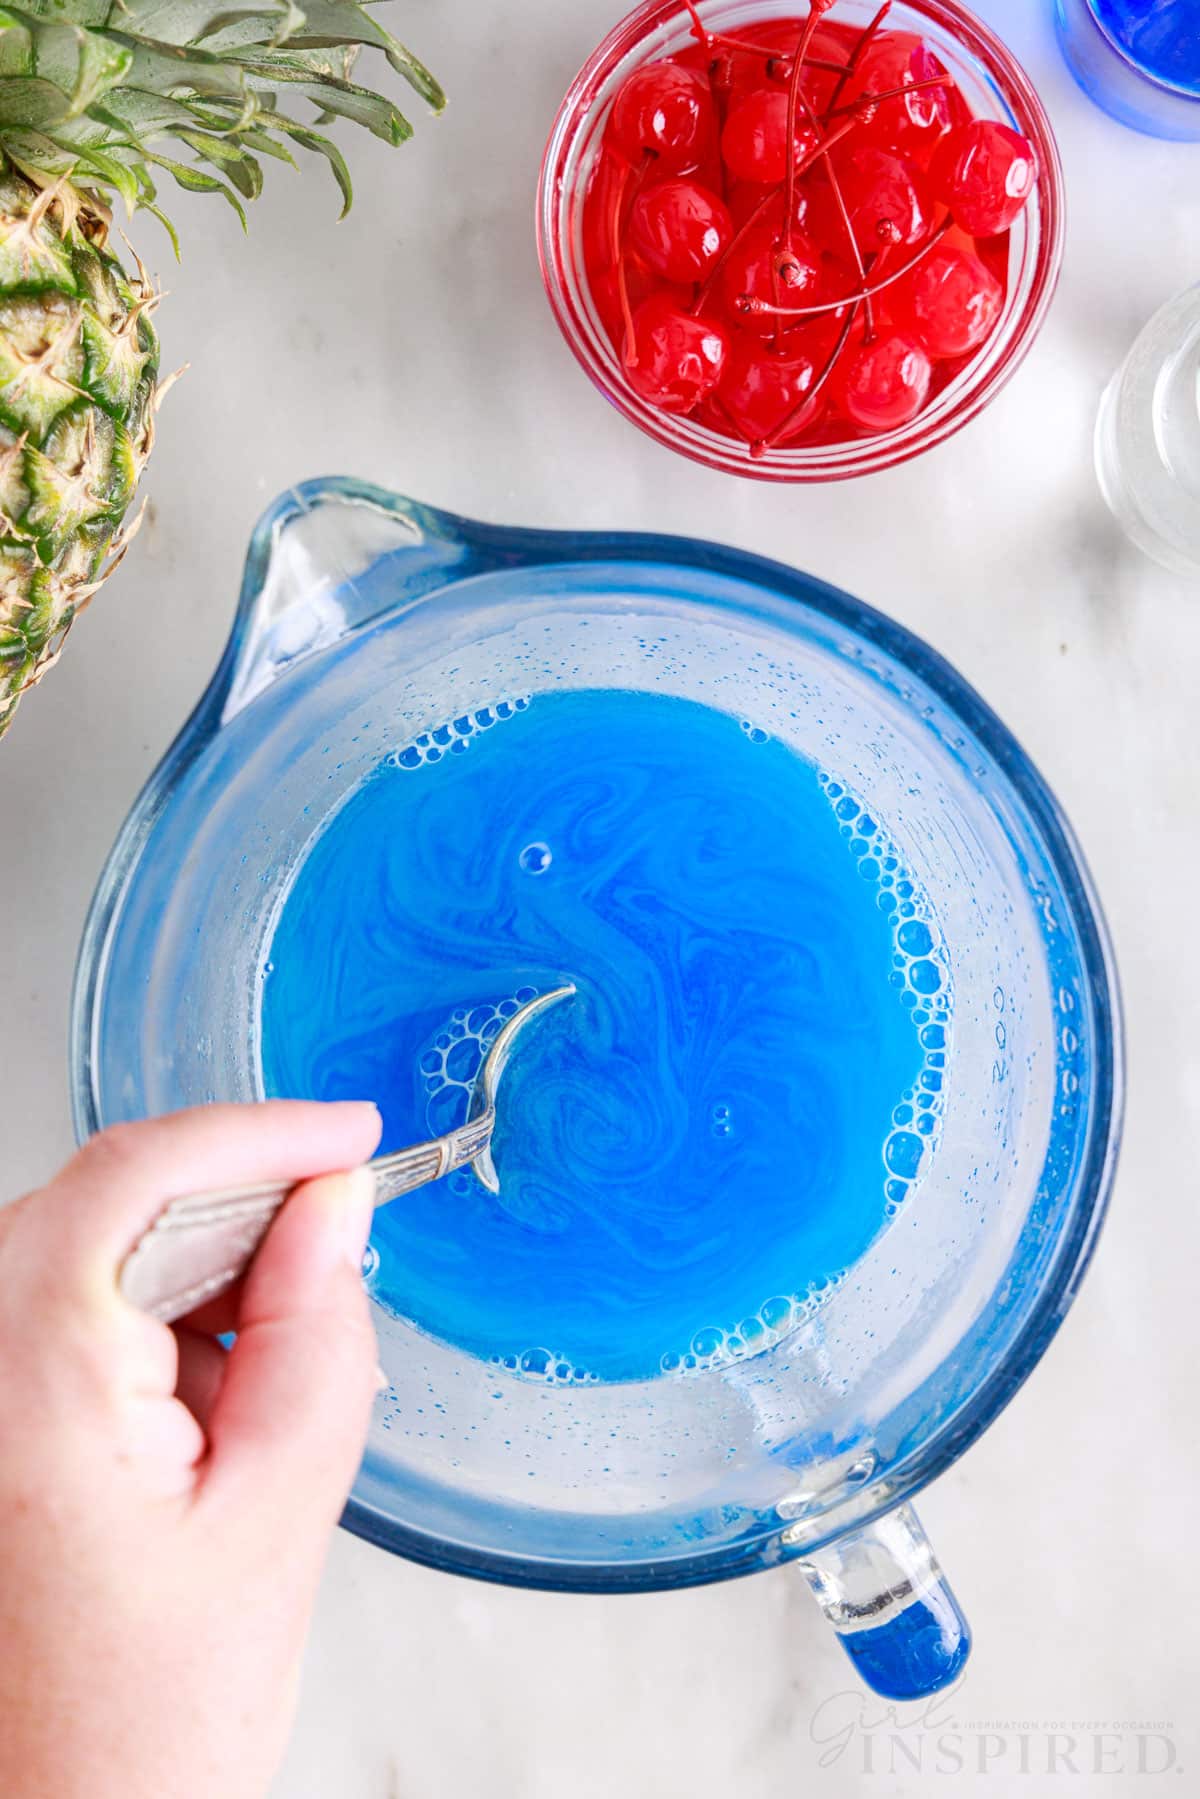 Boiling water stirred into blue jello with a spoon in a mixing bowl next to a bowl of cherries.